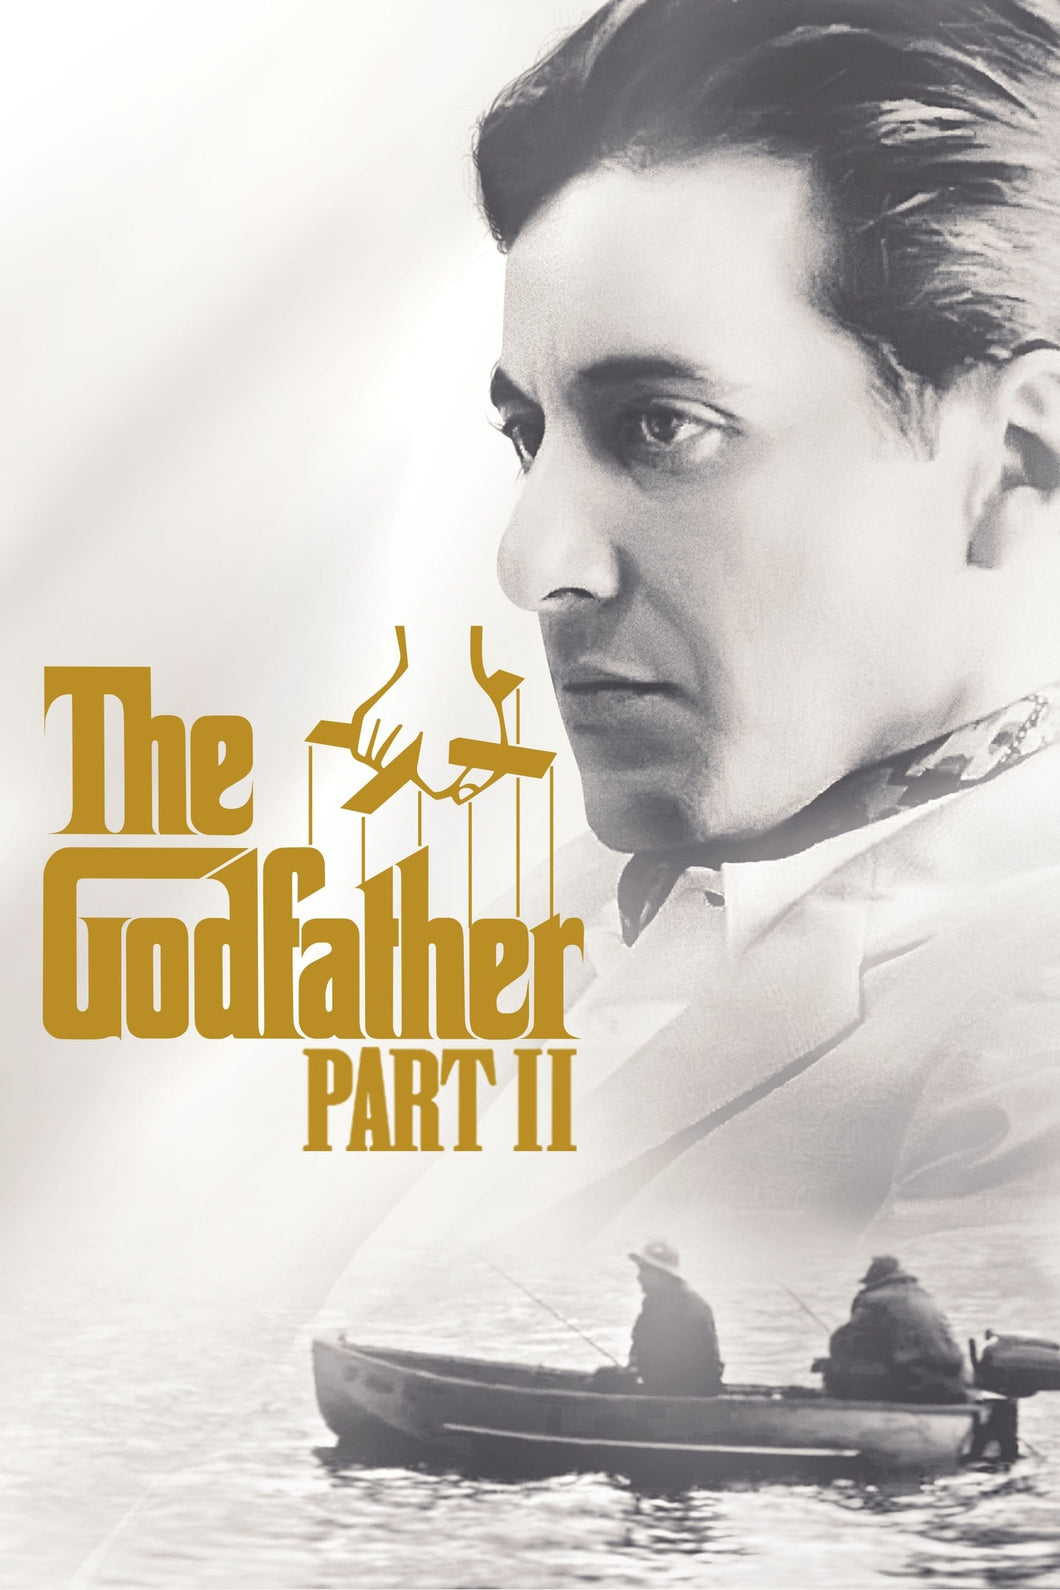 The Godfather Part II (1974) v3 Movie Poster High Quality Glossy Paper A1 A2 A3 A4 A3 Framed or Unframed!!